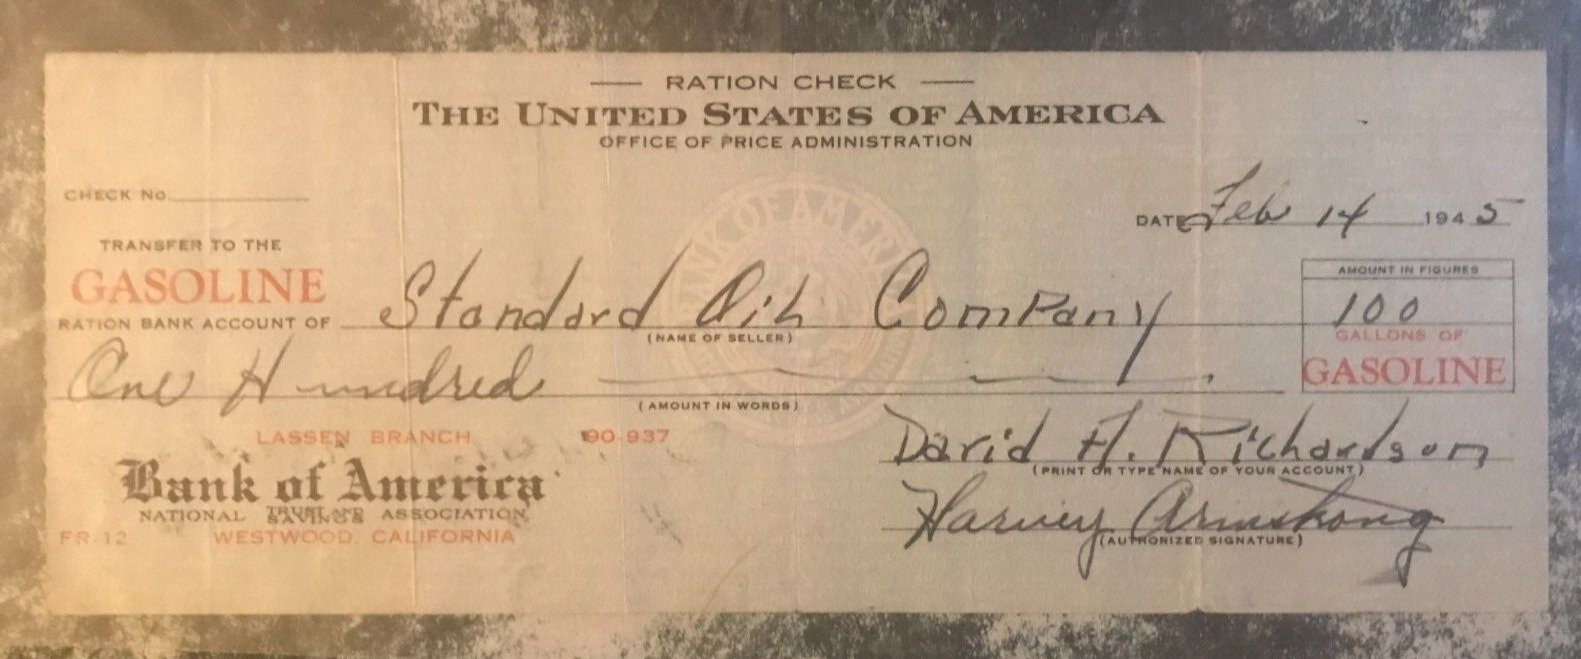 1945 U.S.  Gasoline Ration Bank Check to Standard Oil  Co. for 100 gallons